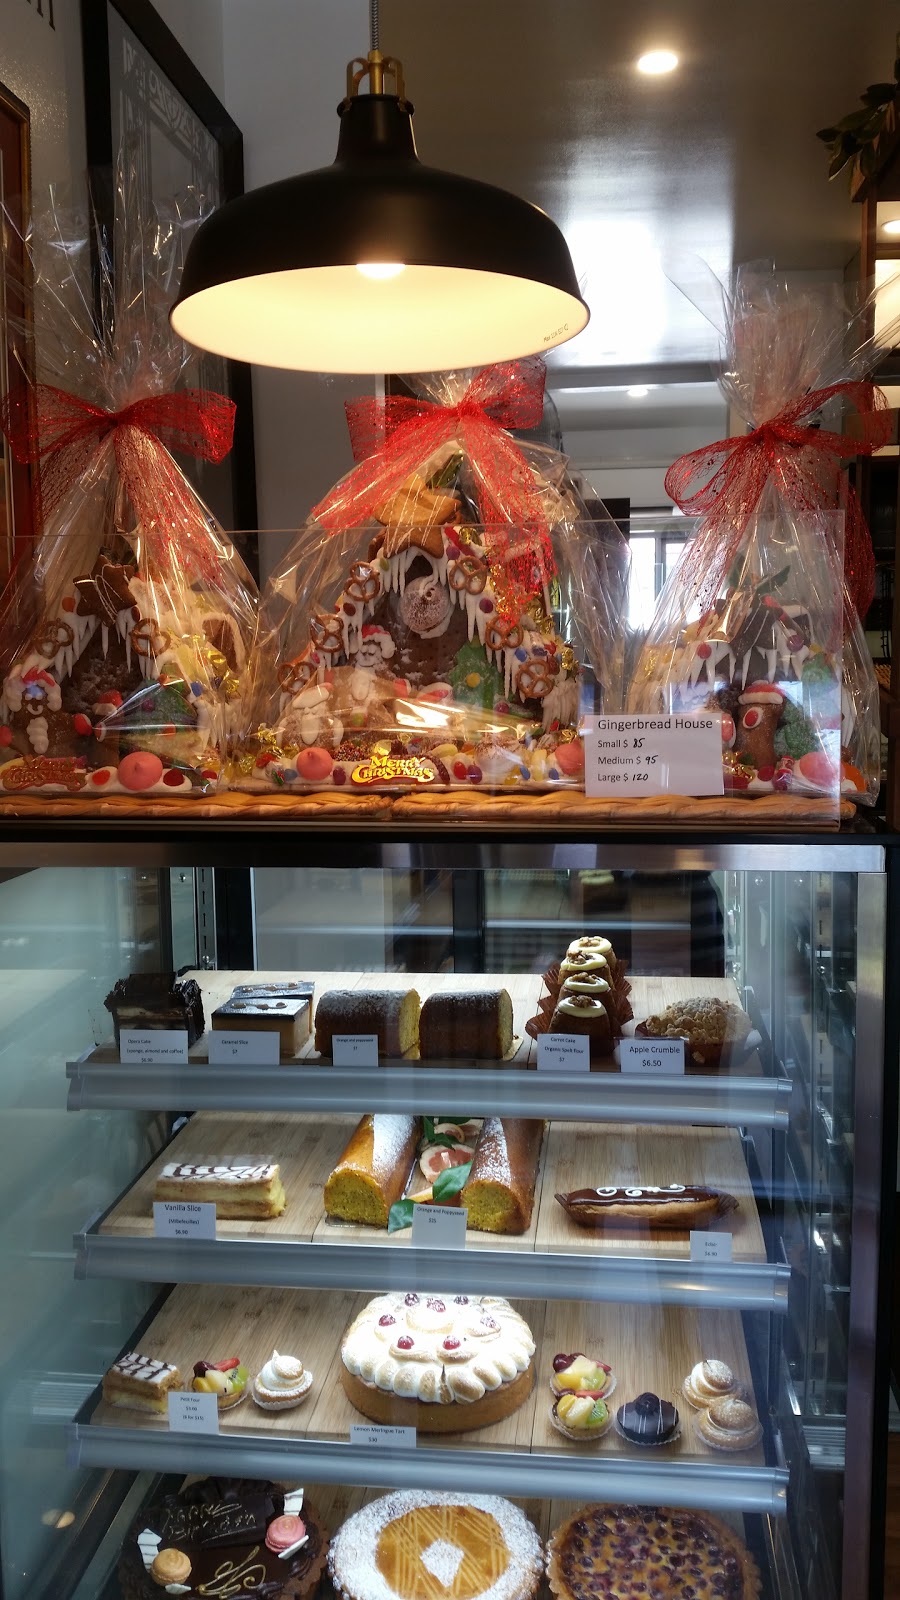 Jacques Patisserie Boulangerie | 2/681 New Cleveland Rd, Gumdale QLD 4154, Australia | Phone: (07) 3393 9117